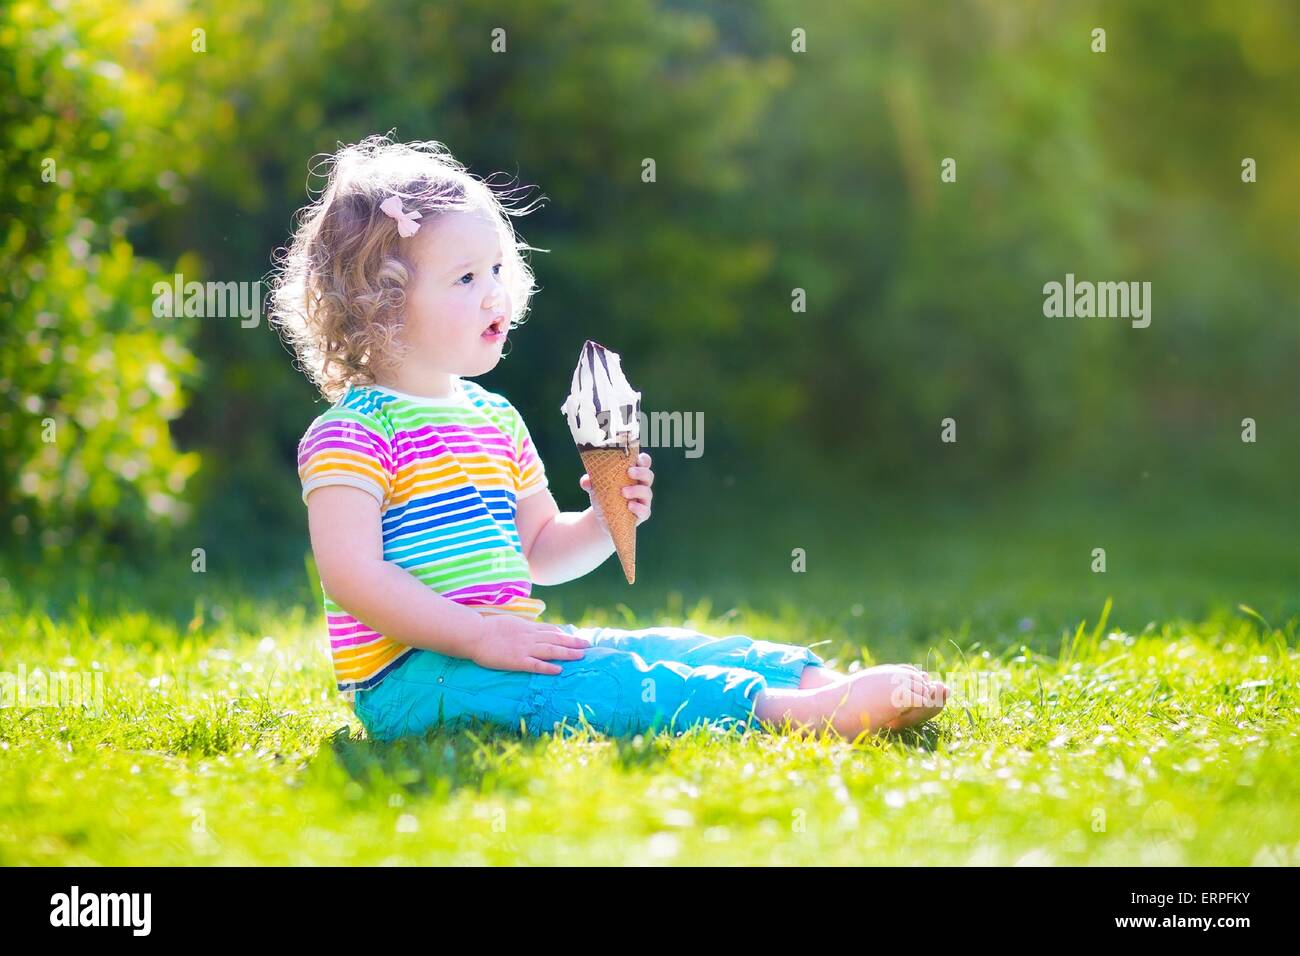 Funny toddler girl with curly hair wearing colorful summer shirt and blue jeans sitting on green lawn eating ice cream cone Stock Photo